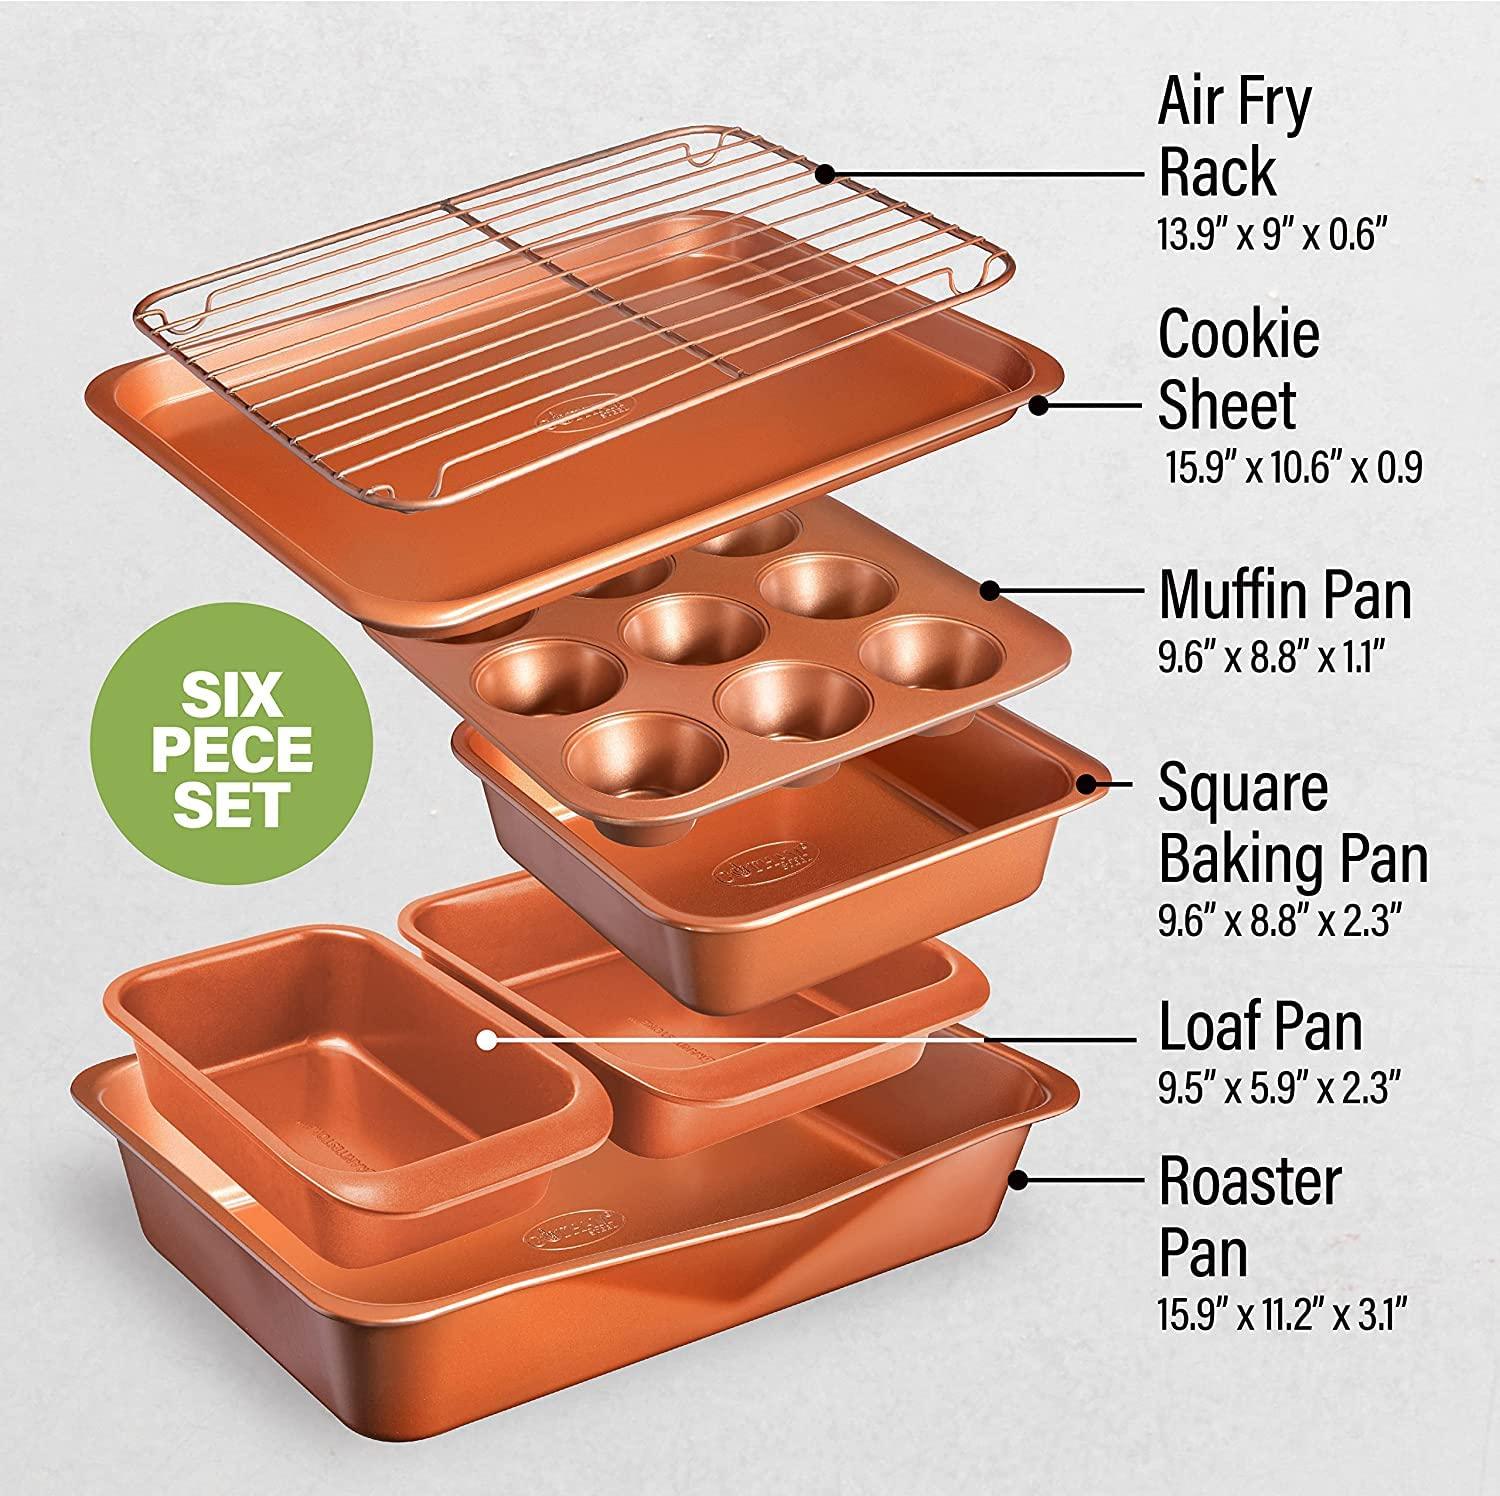 Gotham Steel 6 Pc Stackable Bakeware Set/Baking Pans Set Nonstick with Oven Pans + Baking Sheet Set and Wire Rack, Complete Baking Set for Kitchen, Oven/Dishwasher Safe, 100% Non Toxic - CookCave